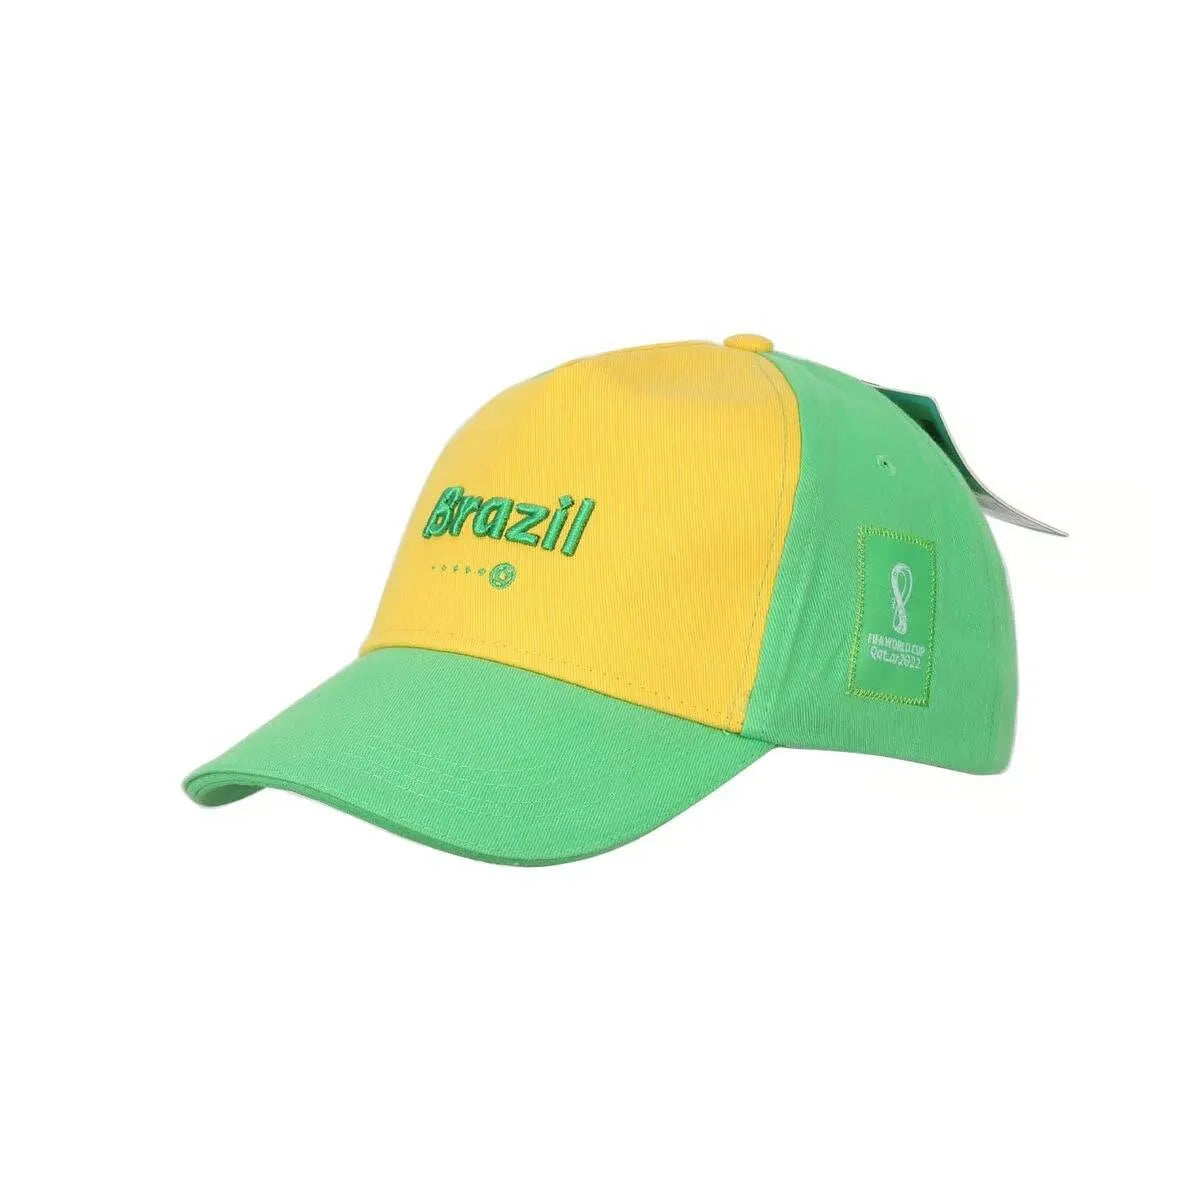 FIFA 2022 with the Official Brazil Boys Cap - Featuring the Official Emblem